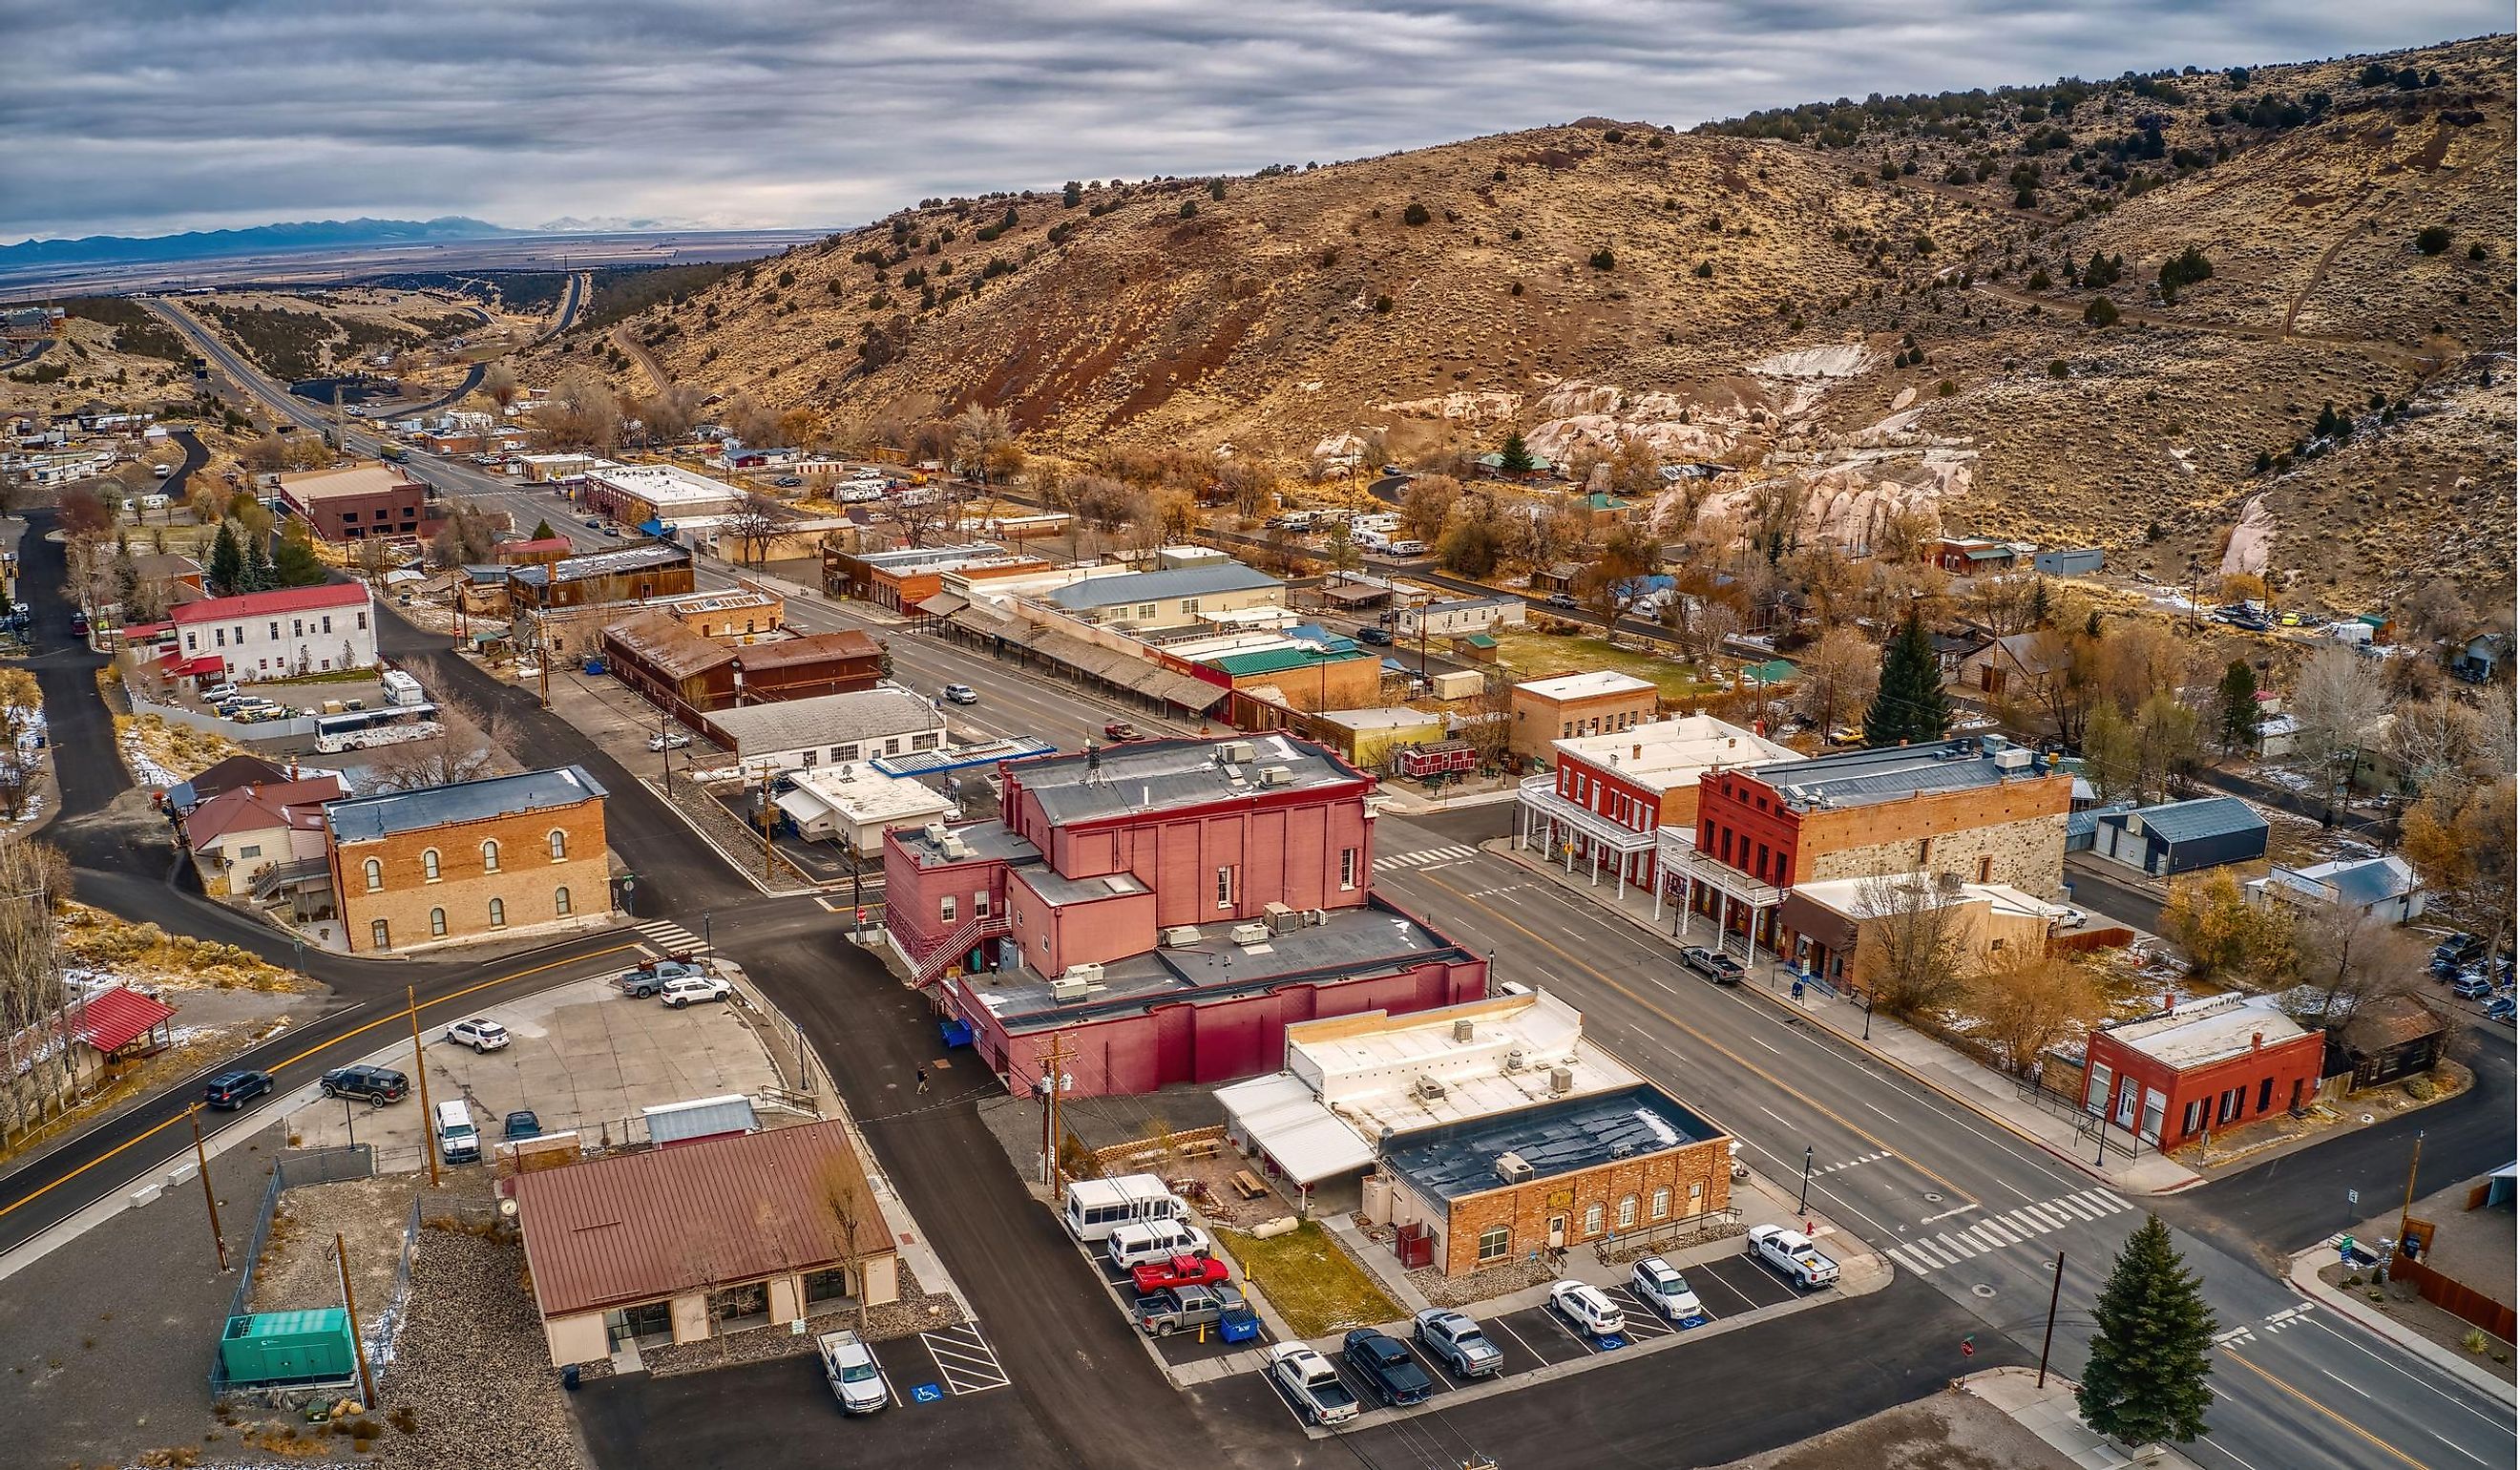 Aerial view of the tiny town of Eureka, Nevada on Highway 50.